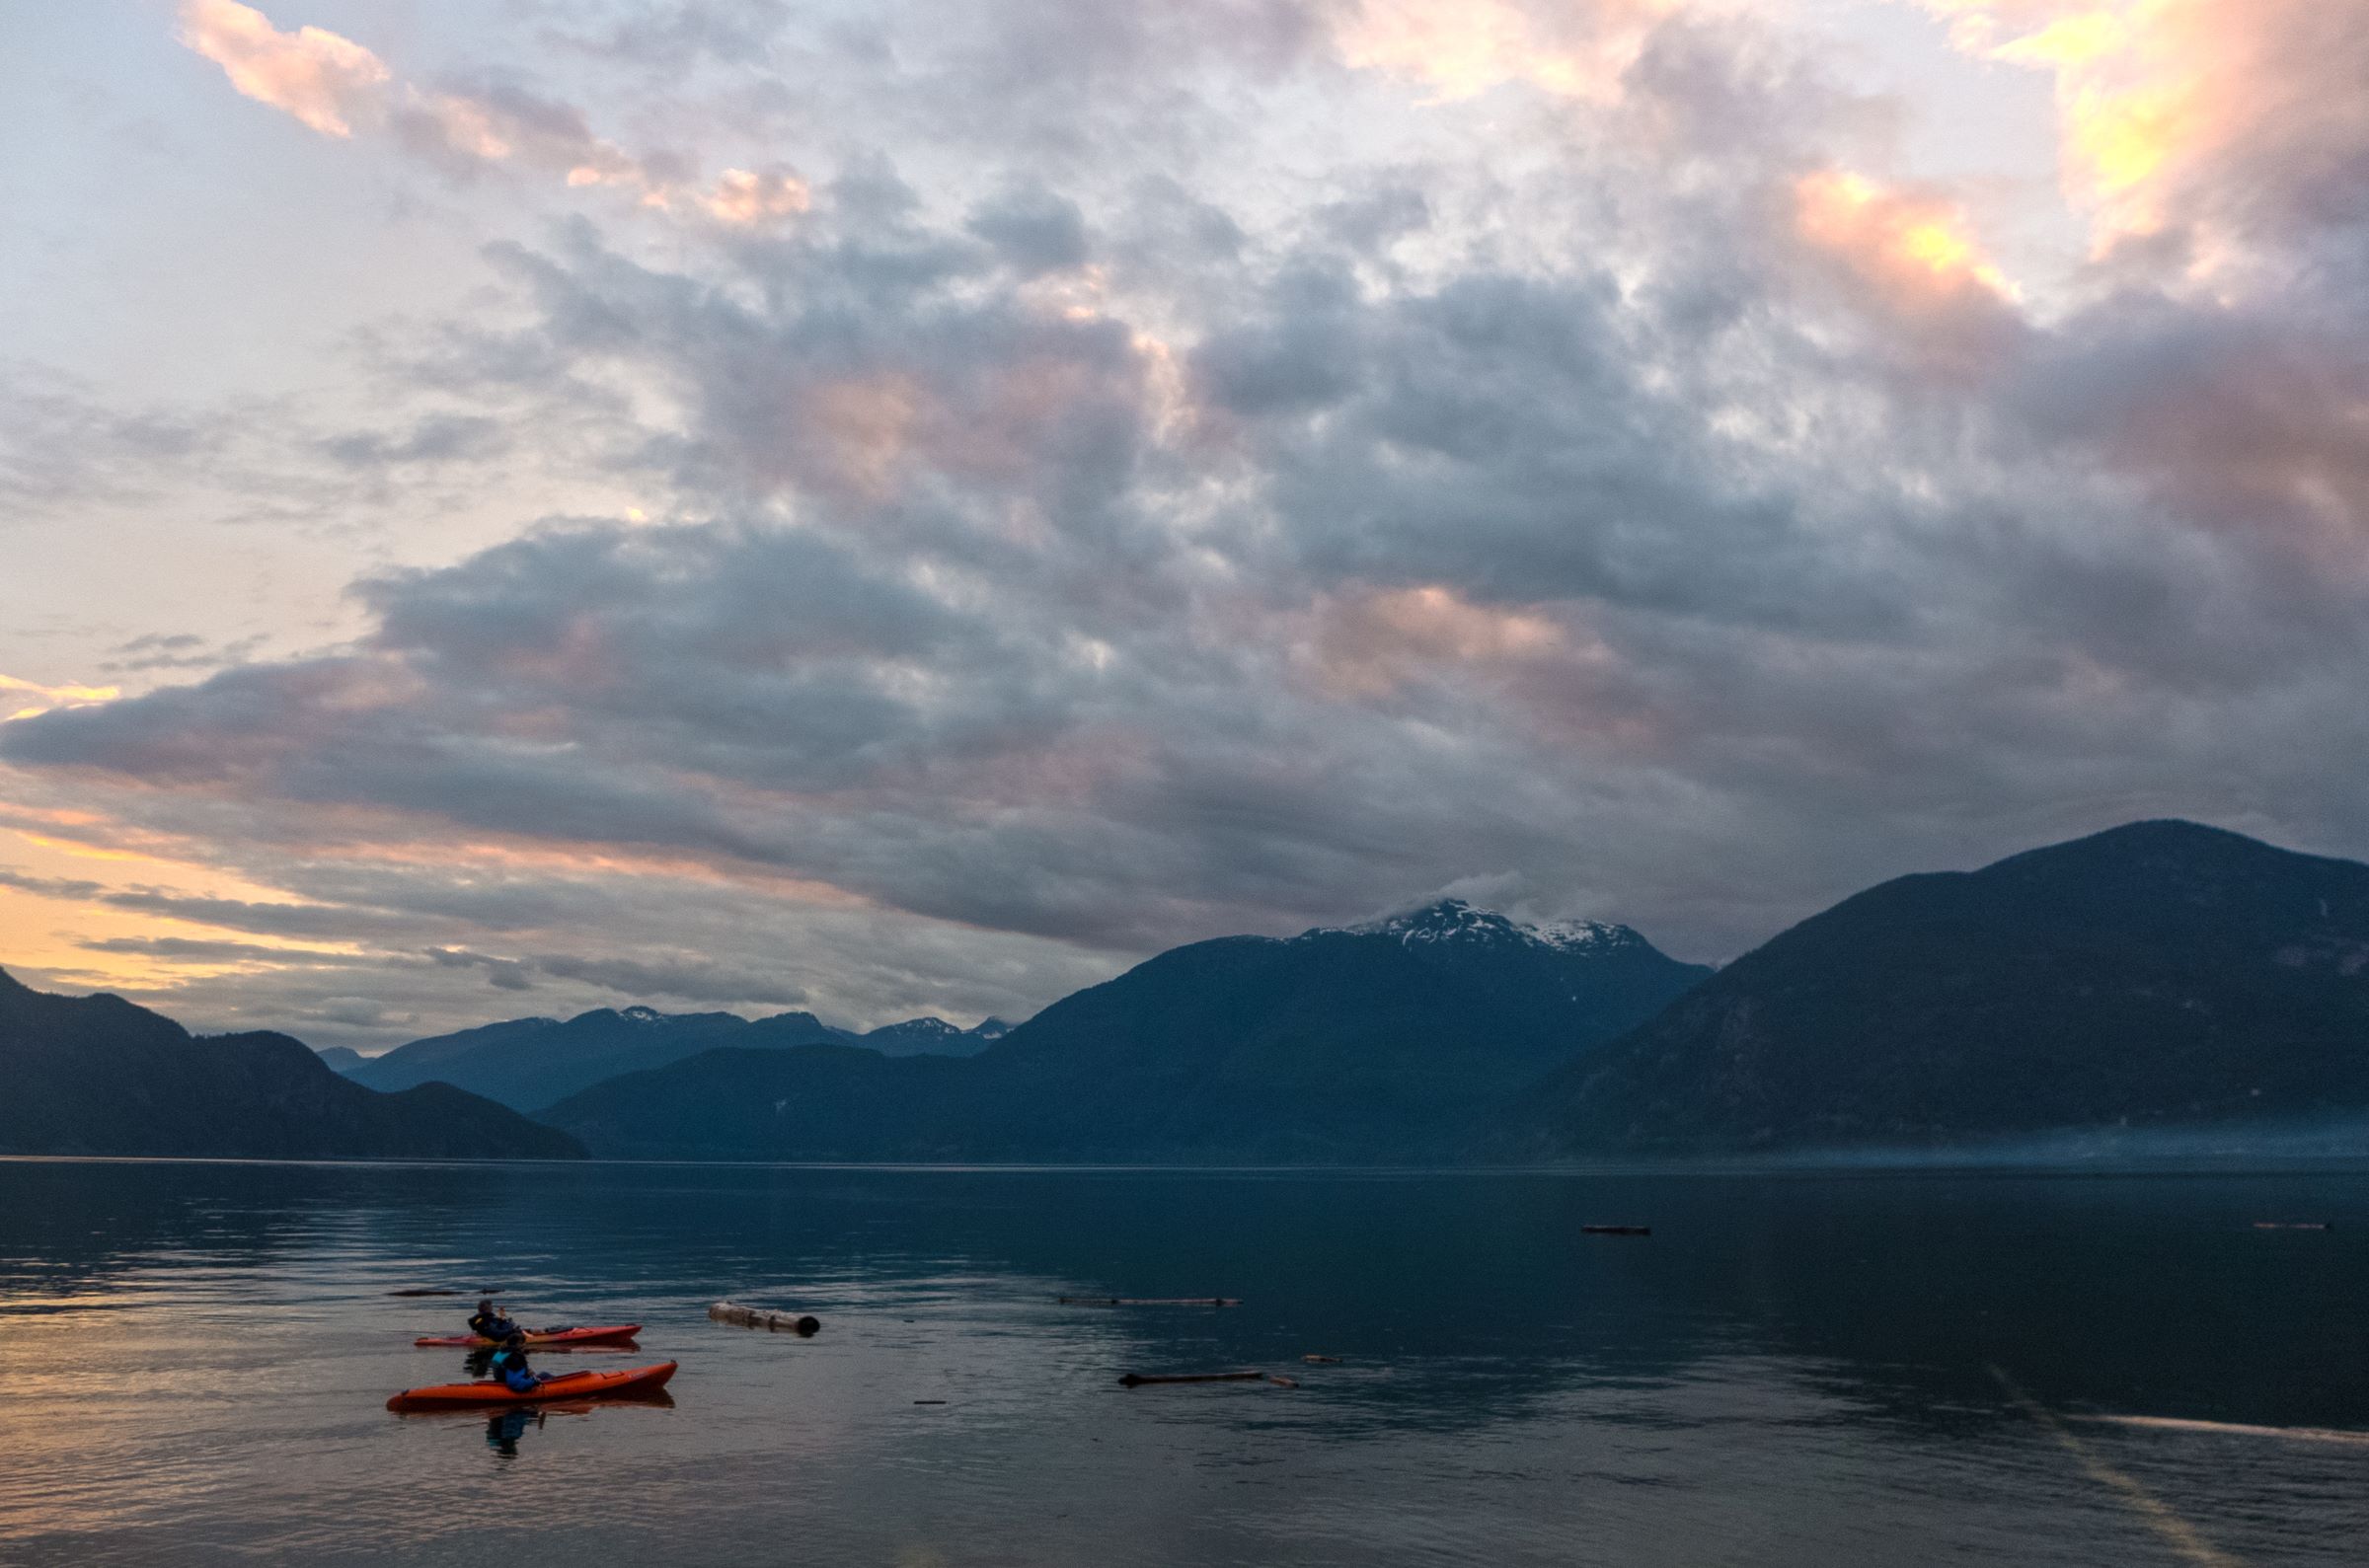 Kayakers in Howe Sound (Photo: Andreas Christen / Flickr Creative Commons)